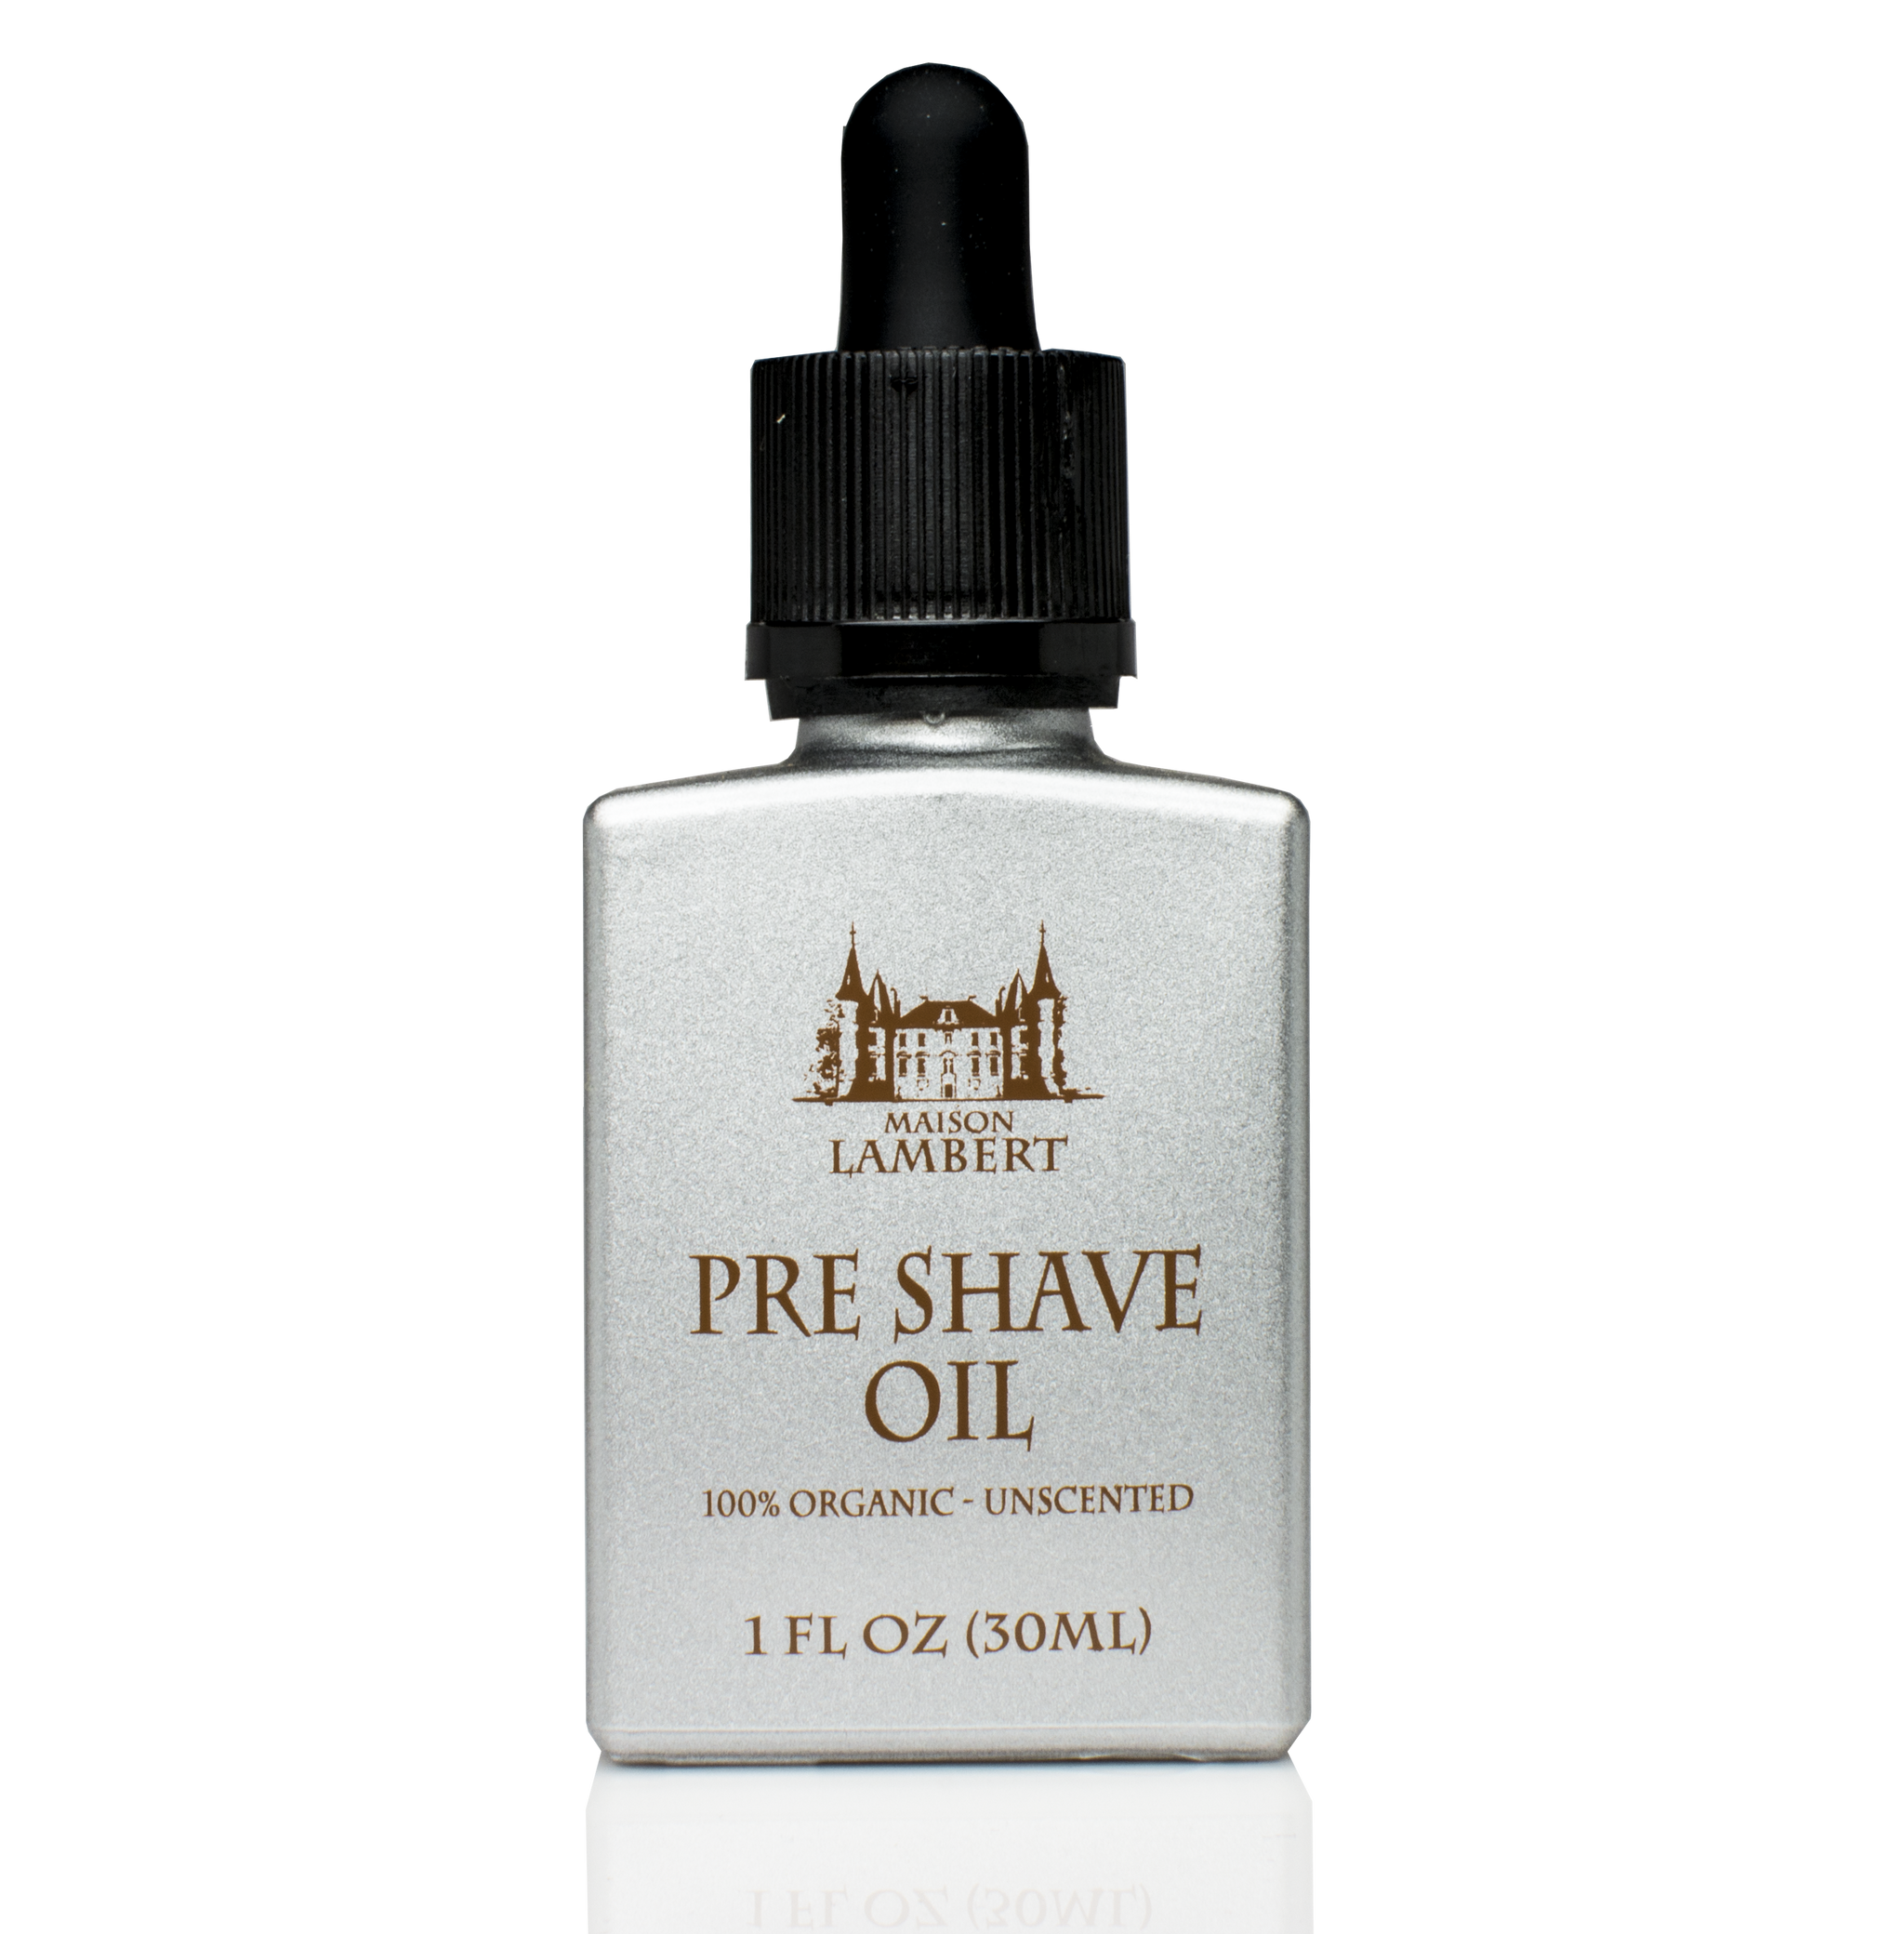 Pre Shave Oil - Maison Lambert Pre Shave Oil - 100% Organic Ingredients - Vegan - Unscented - For Men And For Sensitive Skin And All Skin Types!